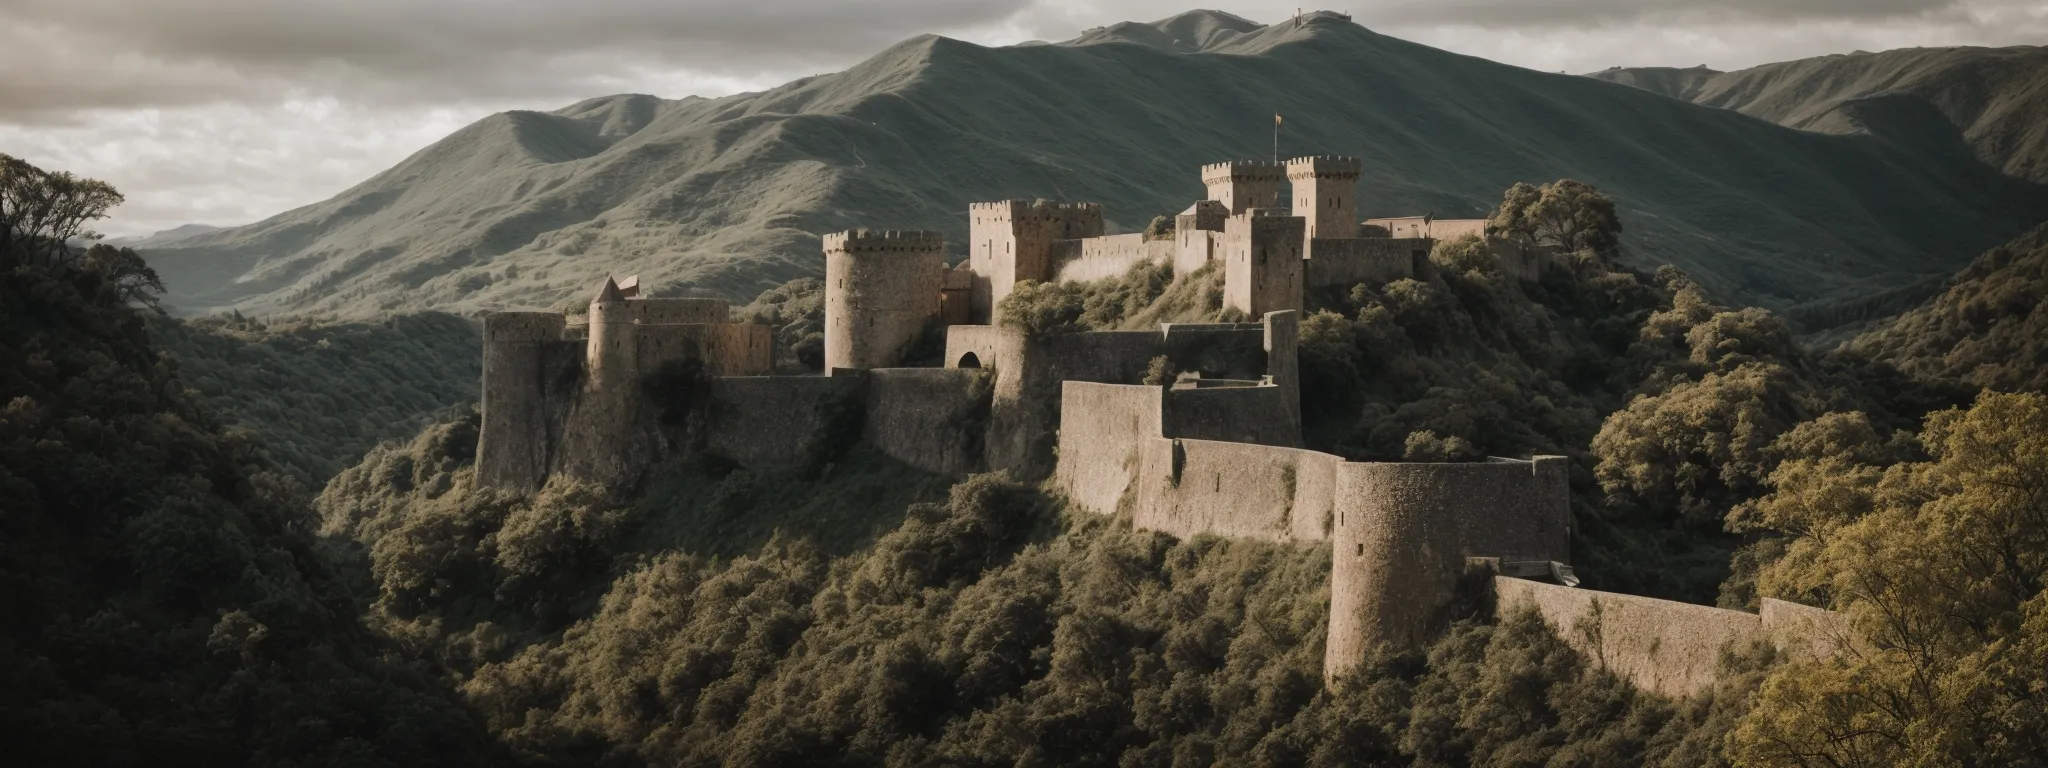 a fortress with high walls overlooking a digital landscape.